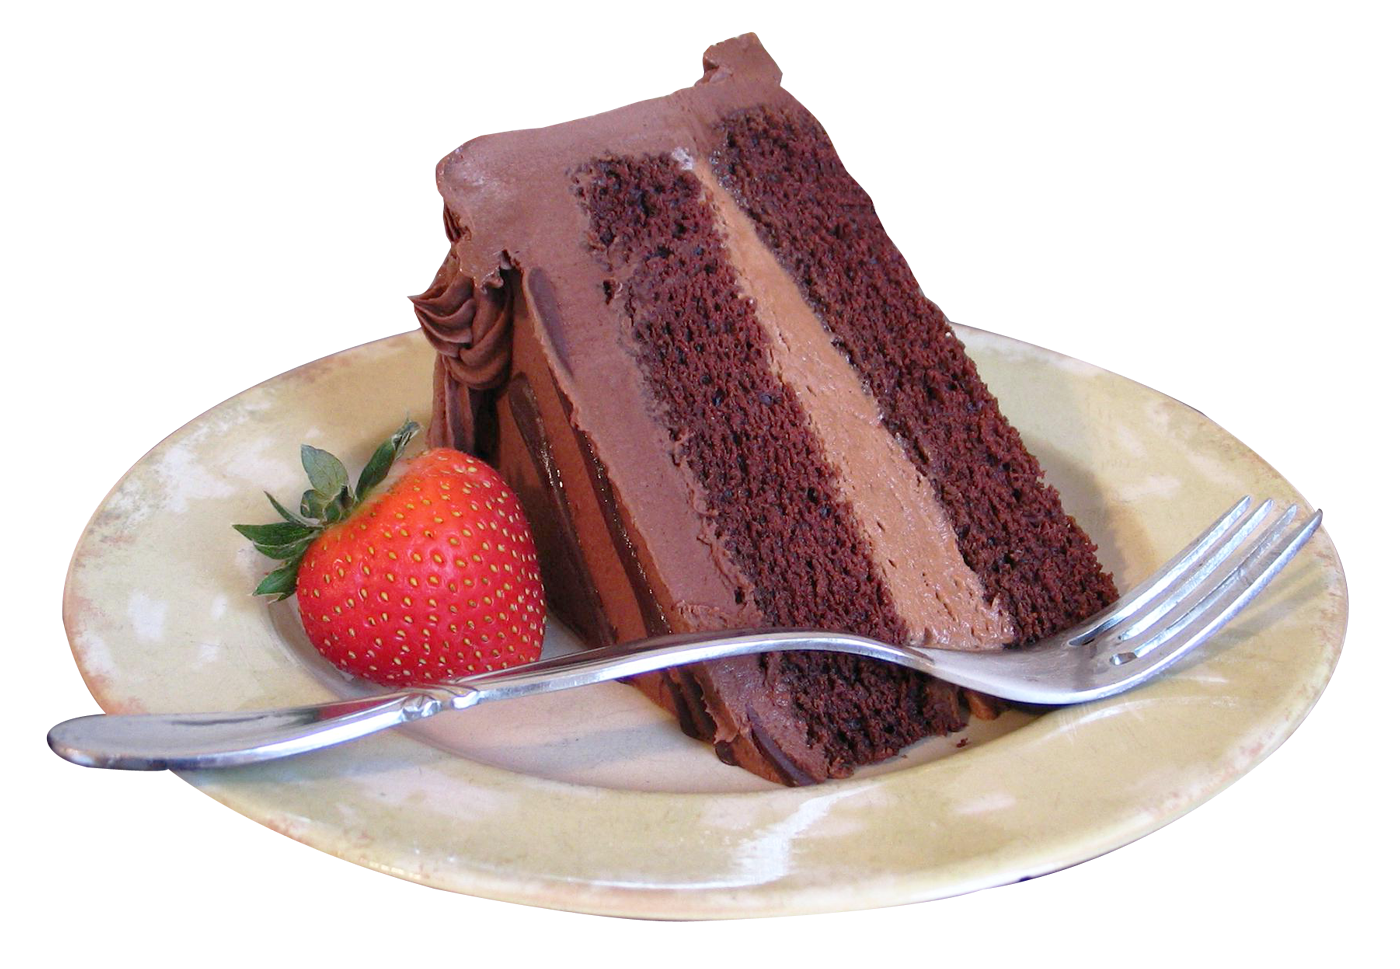 Free Slice Of Cake Png, Download Free Slice Of Cake Png png images, Free  ClipArts on Clipart Library